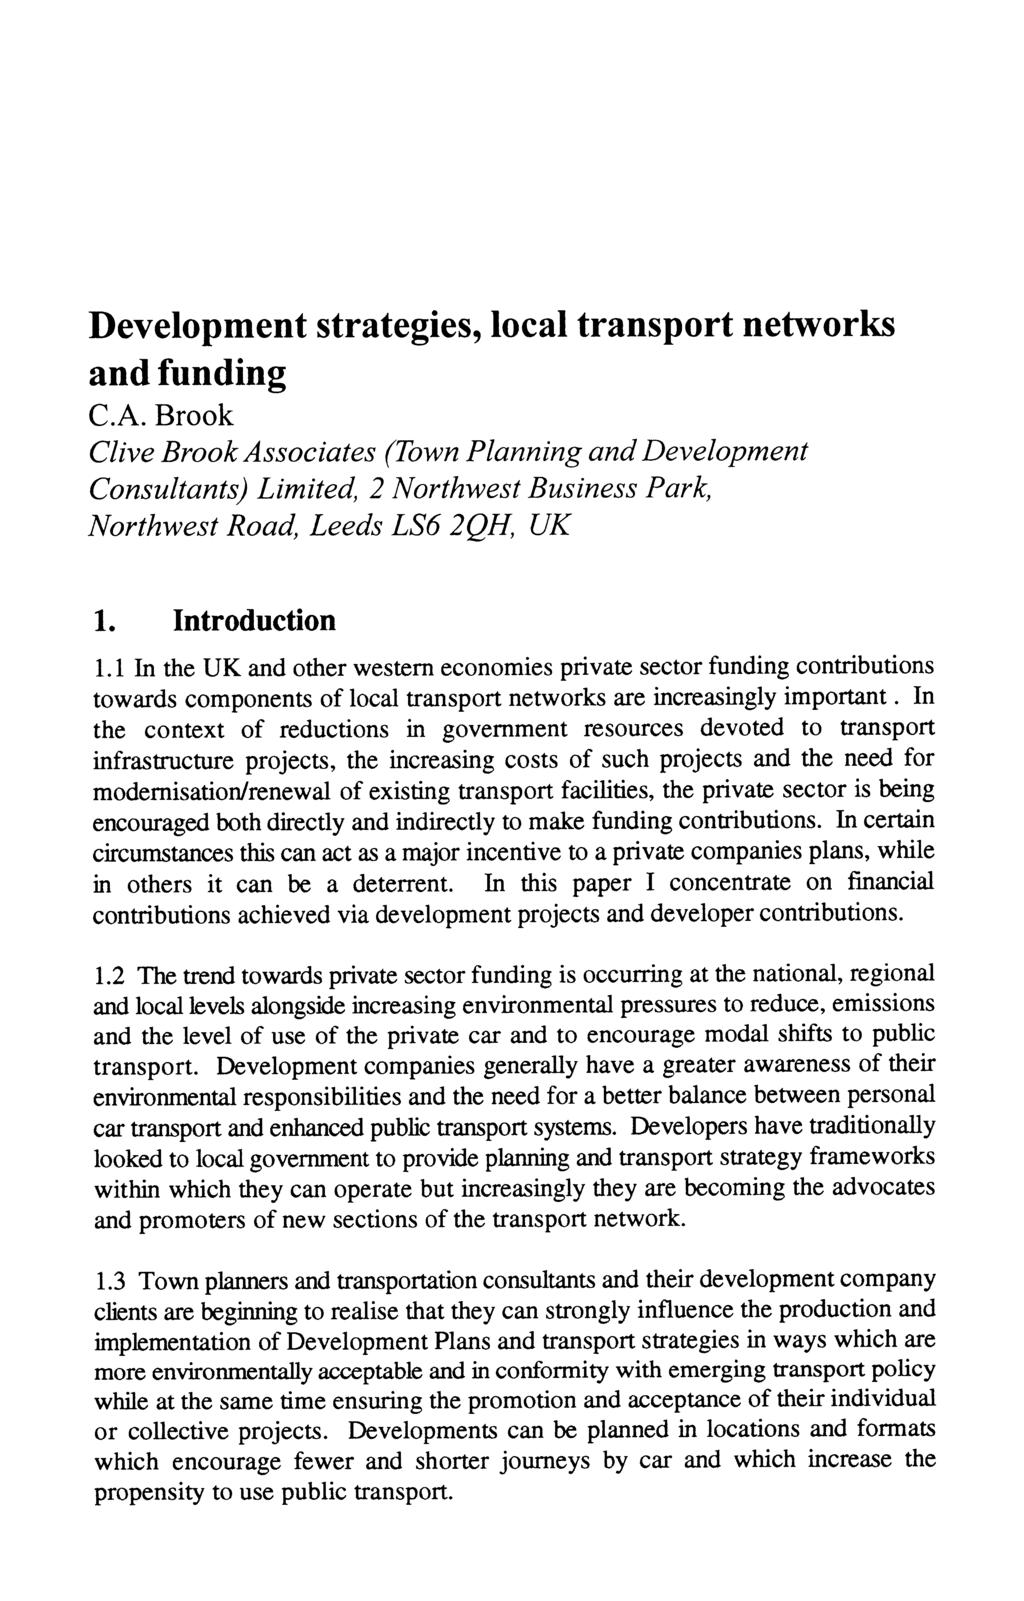 Development strategies, local transport networks and funding C.A. Brook Clive Brook Associates (Town Planning and Development Consultants) Limited, 2 Northwest Business Park, 1. Introduction 1.